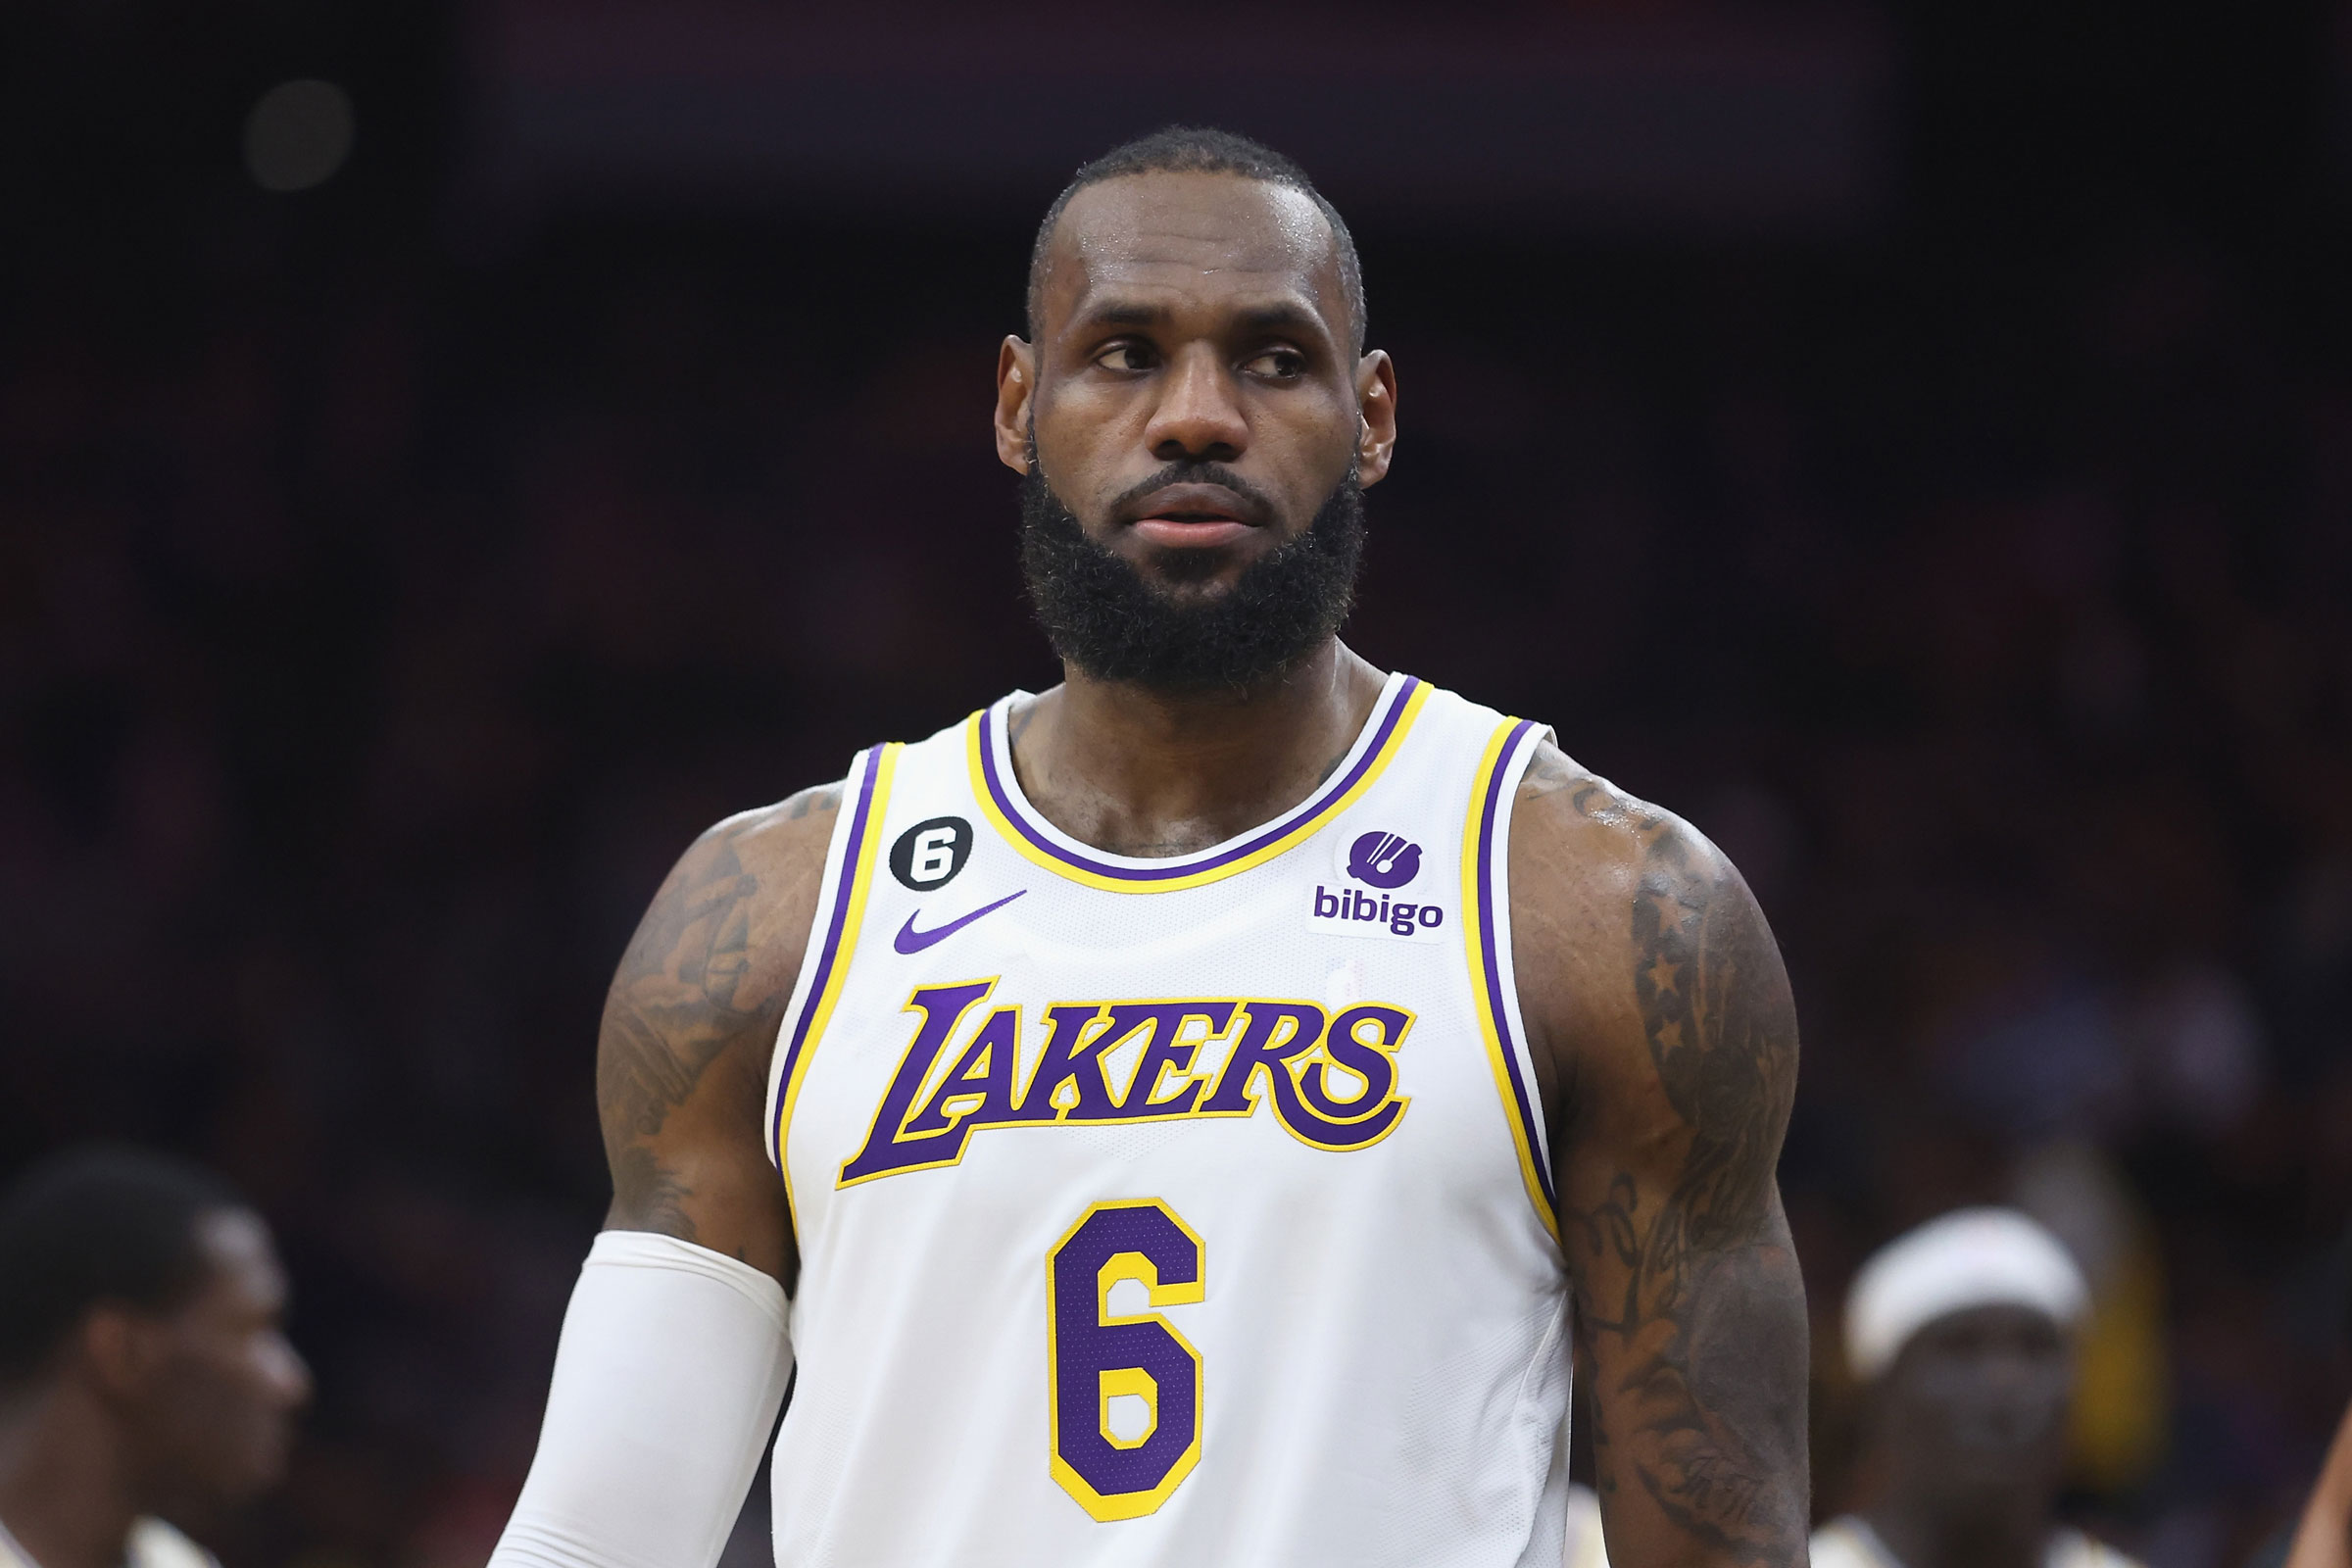 SACRAMENTO, CALIFORNIA - JANUARY 07: LeBron James #6 of the Los Angeles Lakers looks on in the second quarter against the Sacramento Kings at Golden 1 Center on January 07, 2023 in Sacramento, California. NOTE TO USER: User expressly acknowledges and agrees that, by downloading and/or using this photograph, User is consenting to the terms and conditions of the Getty Images License Agreement. (Photo by Lachlan Cunningham/Getty Images) (Getty Images—2023 Lachlan Cunningham)